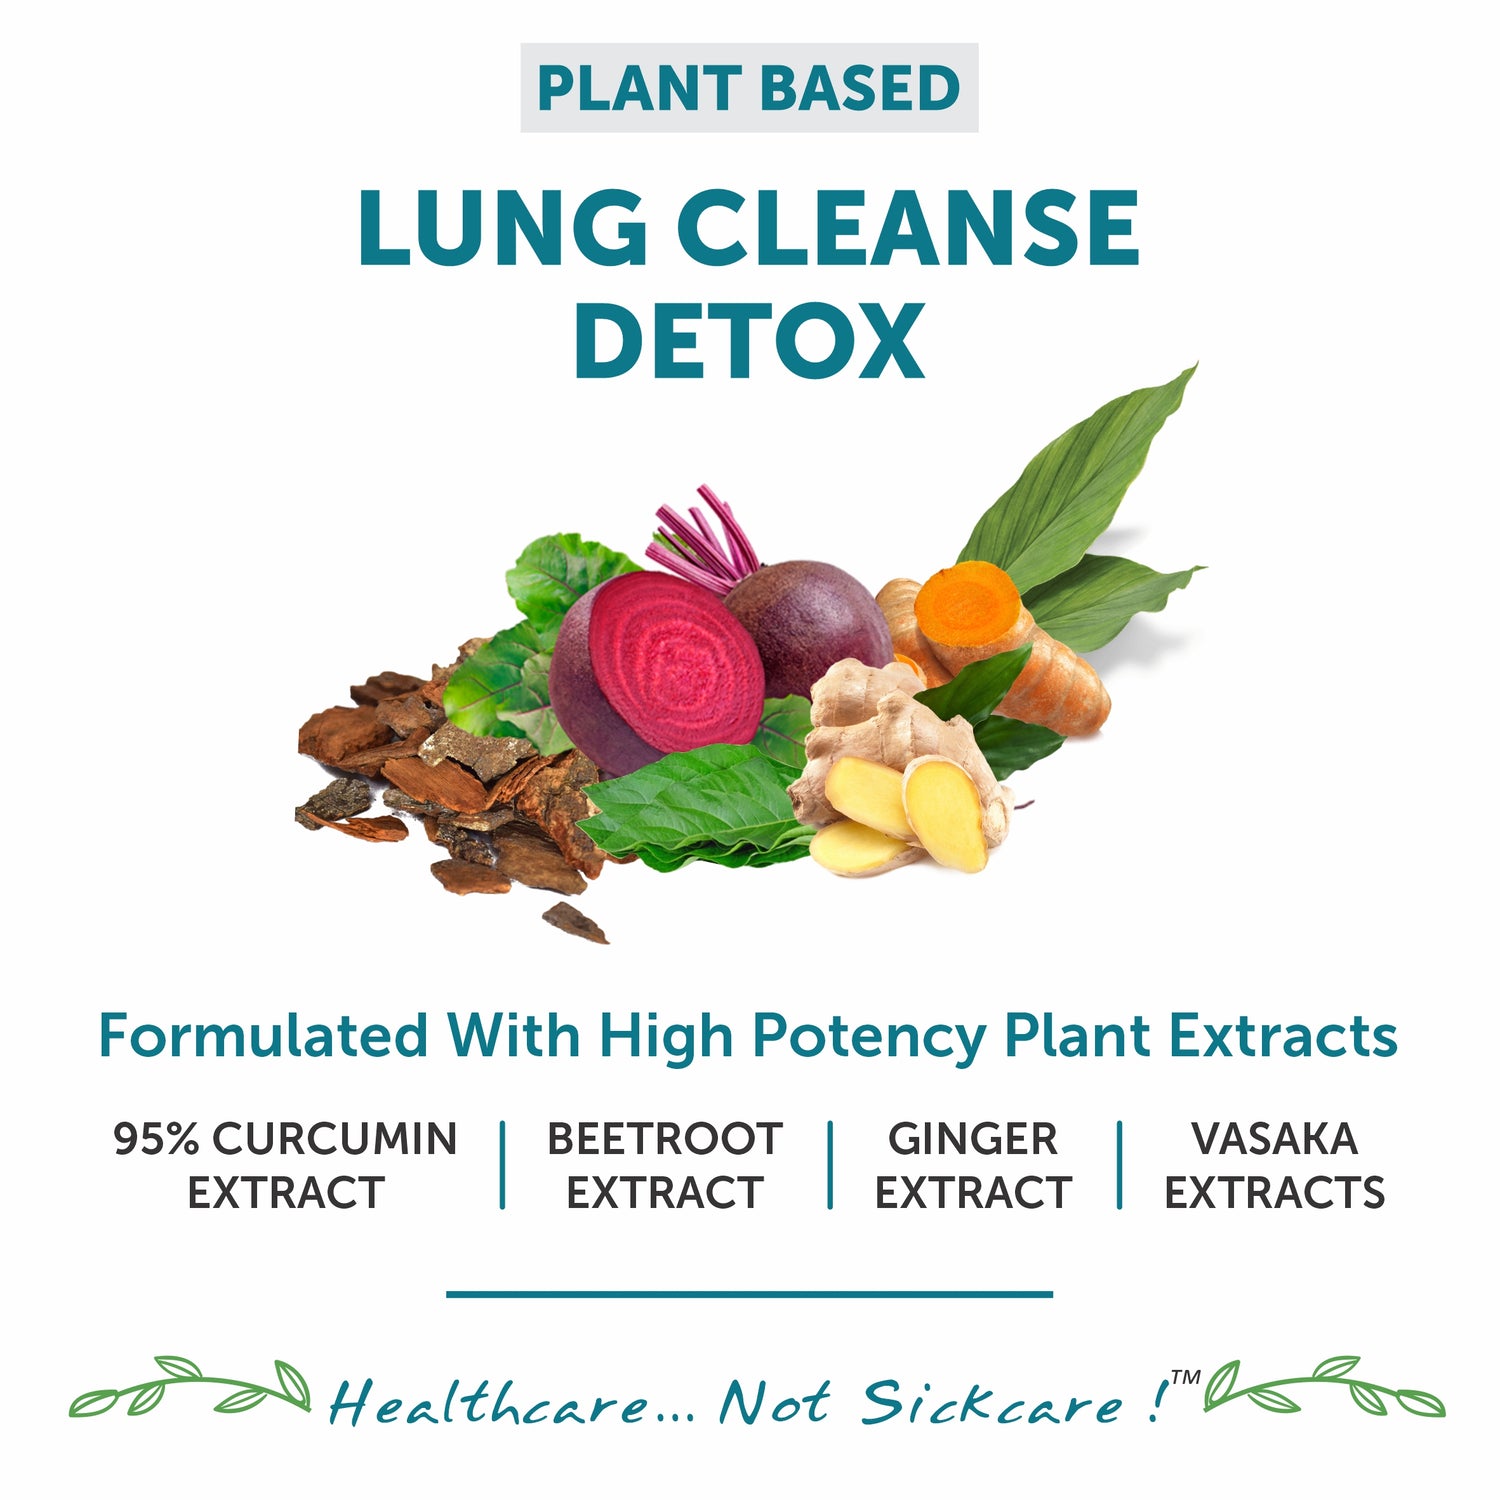 Buy lung detox tablets with Curcumin, Trikatu, Punerneva, and